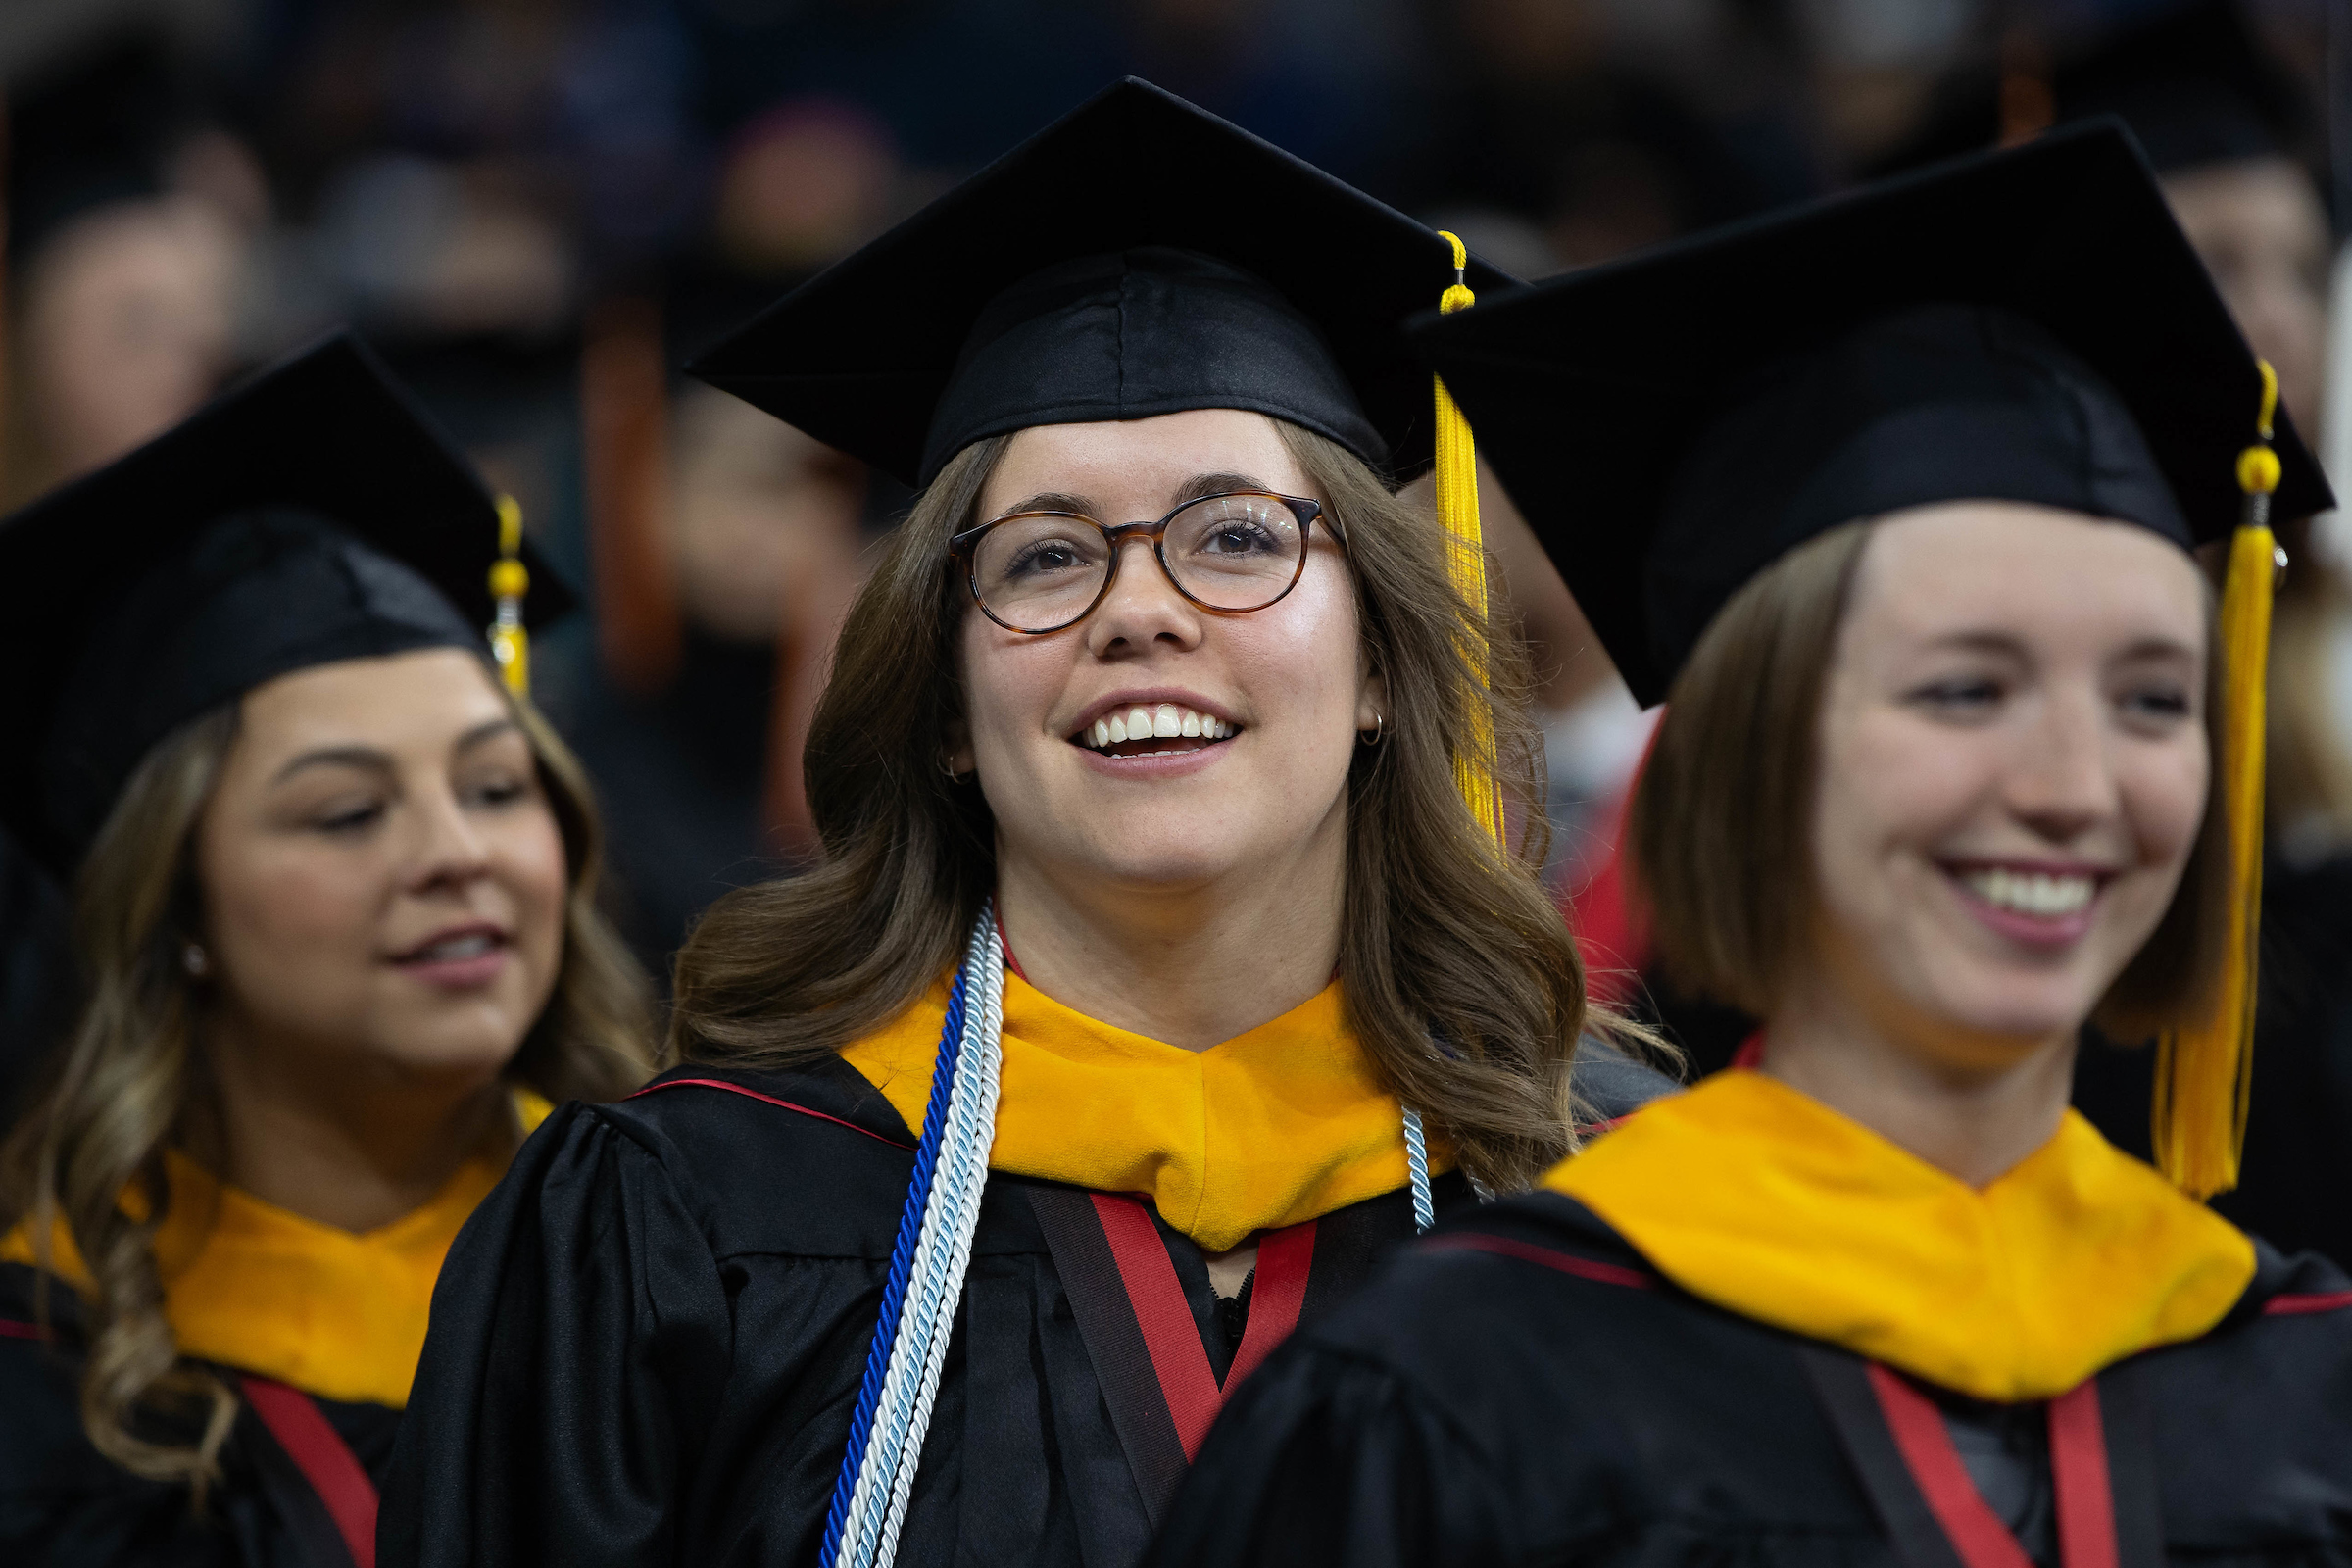 New UNO graduates celebrate their commencement